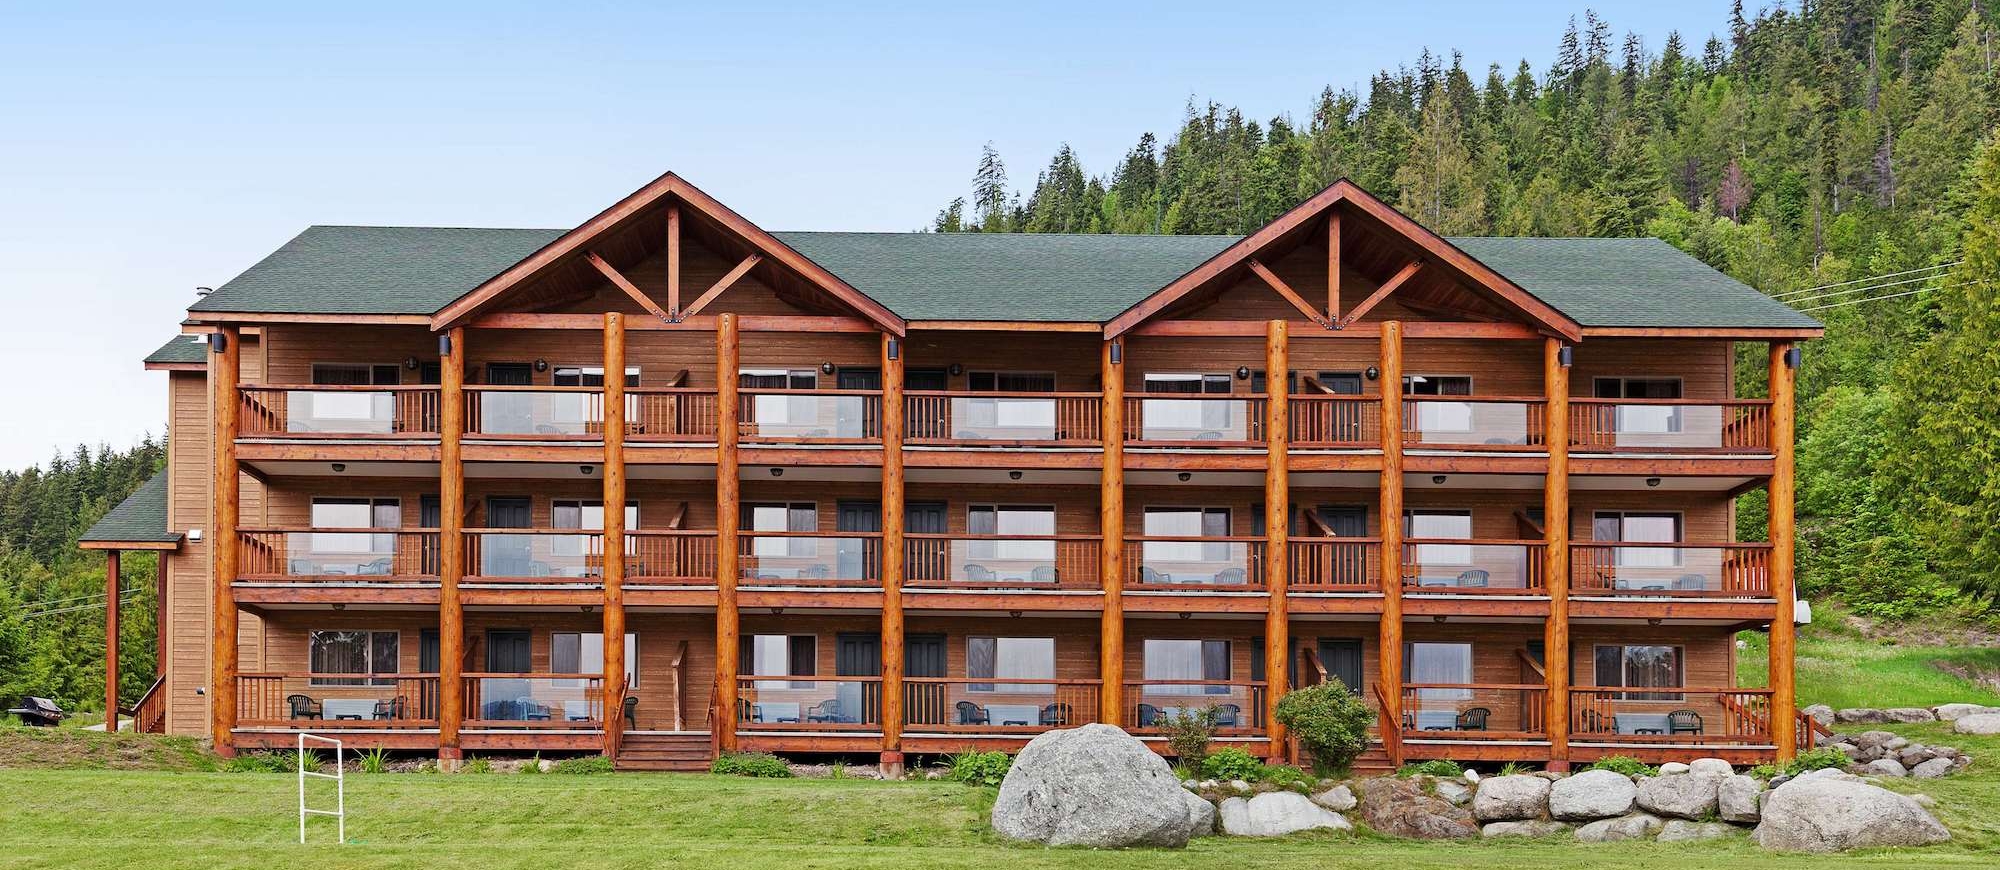 The outside of the Kootenay Lakeview Resort with blue sky in the background.